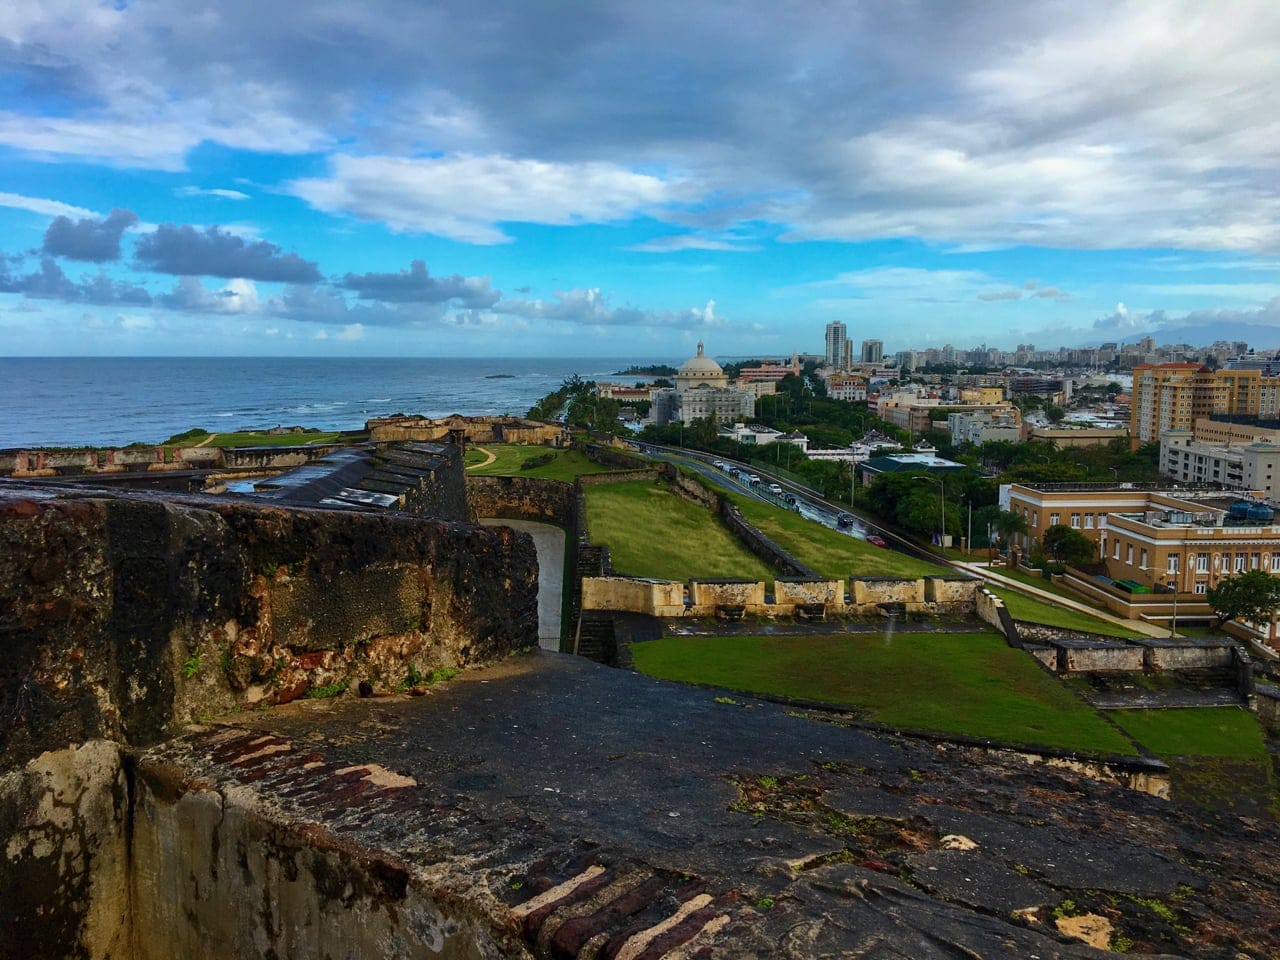 San Juan was a great departure port for our Southern Caribbean Cruise.